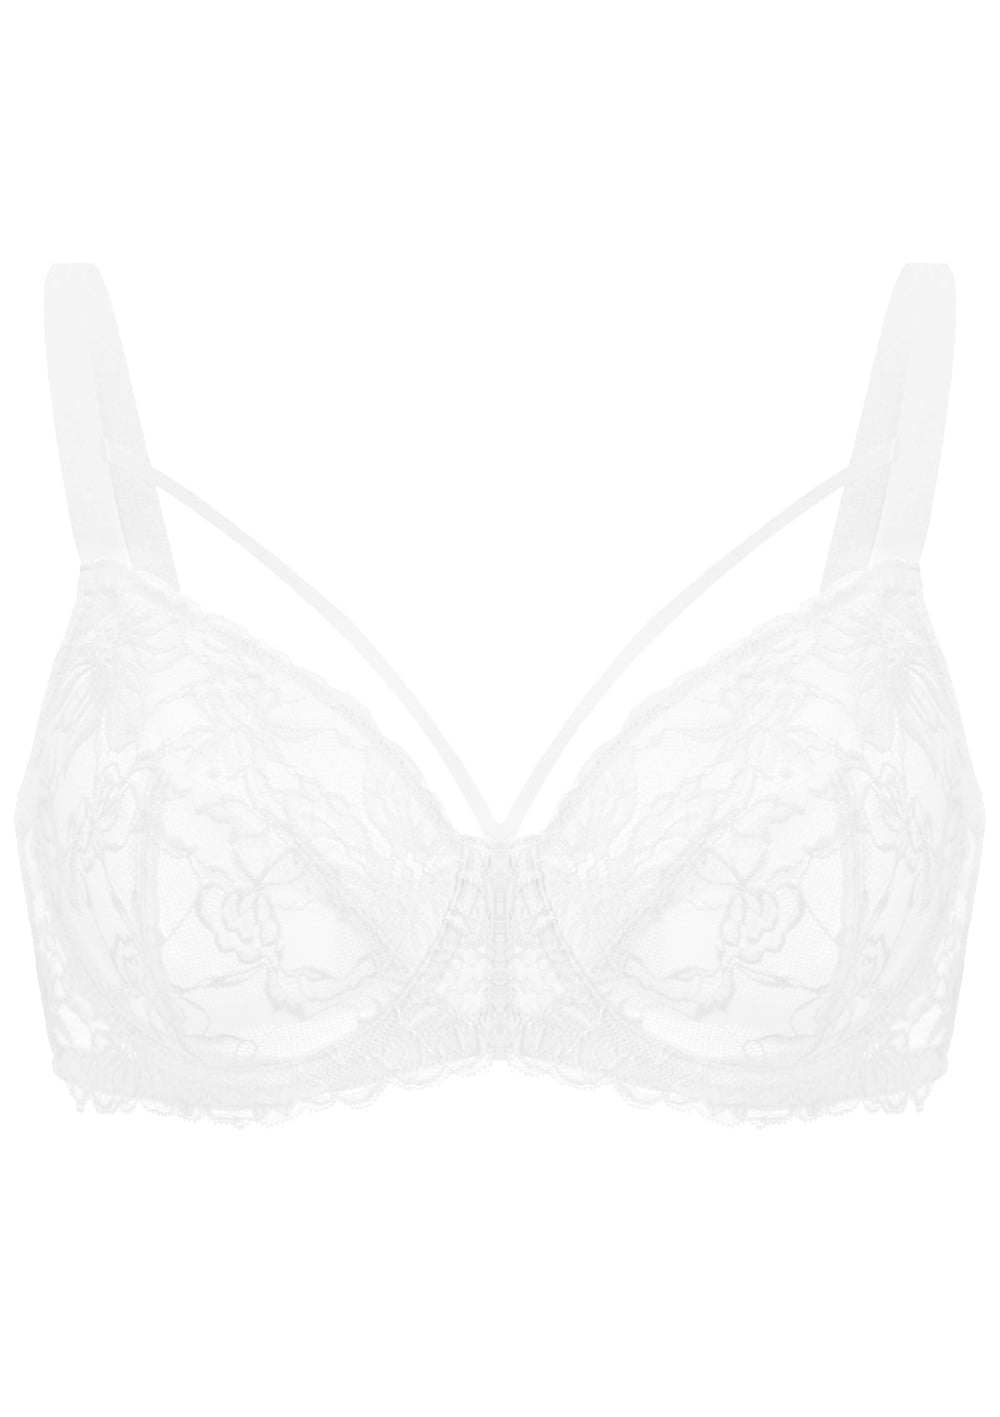 K43EuroFabulous by Peacocks White Lace Slight Padded Wired Plus-Size Bras  DD-G 